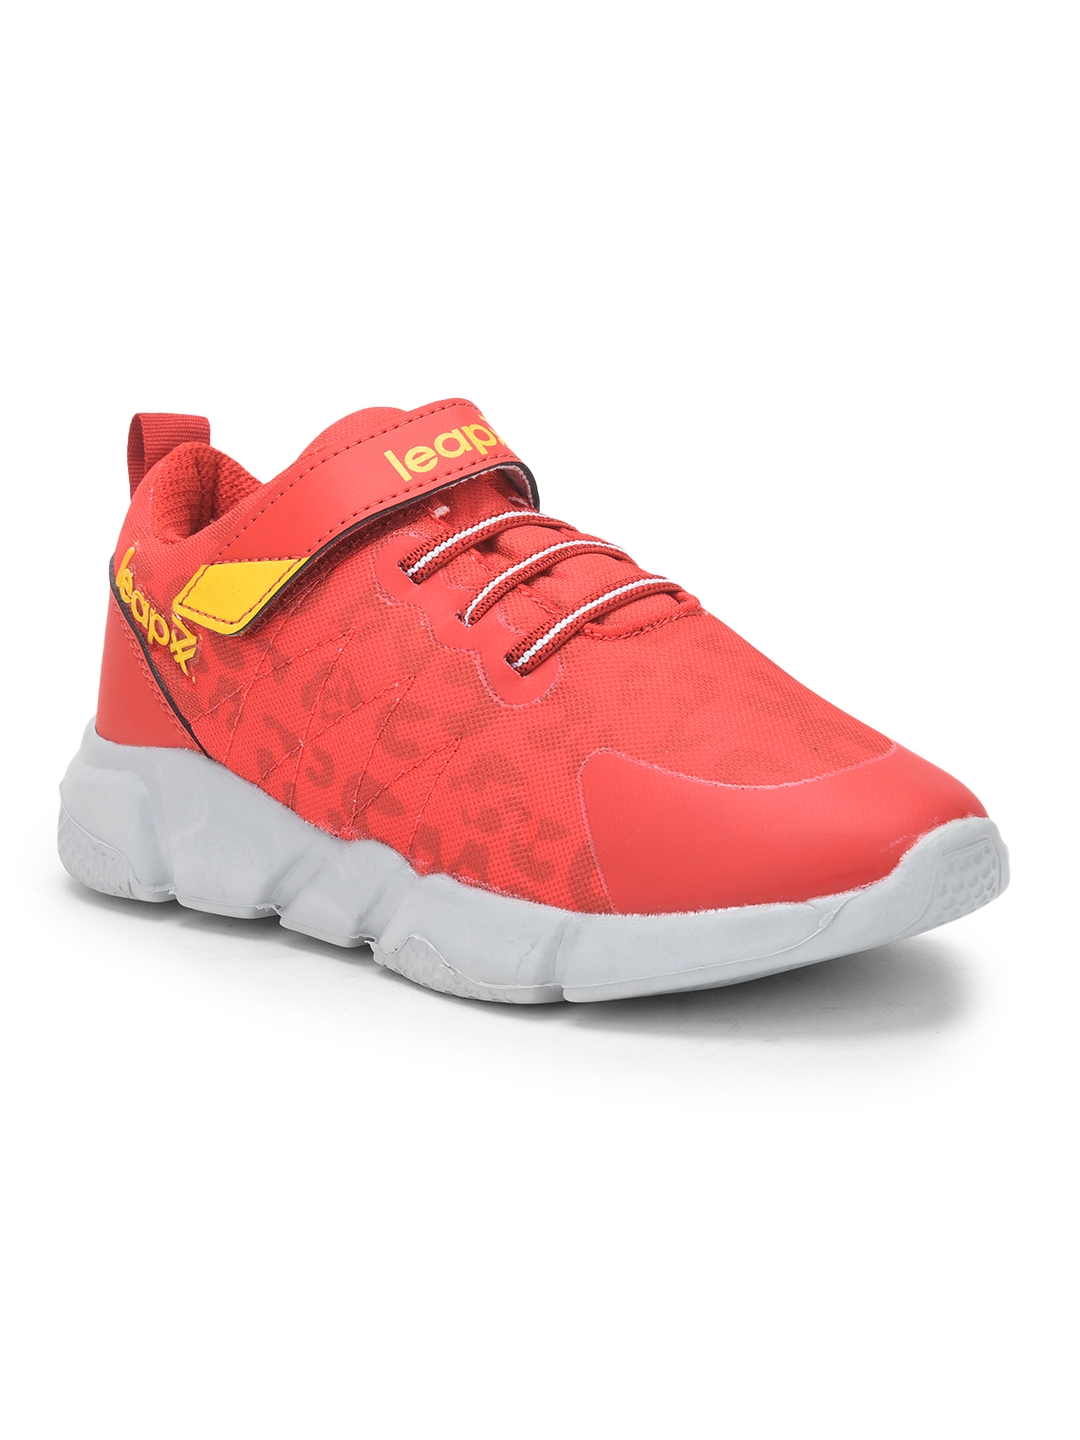 Liberty | LEAP7X by Liberty Red Sports Shoes POLAR-500M For :- Unisex